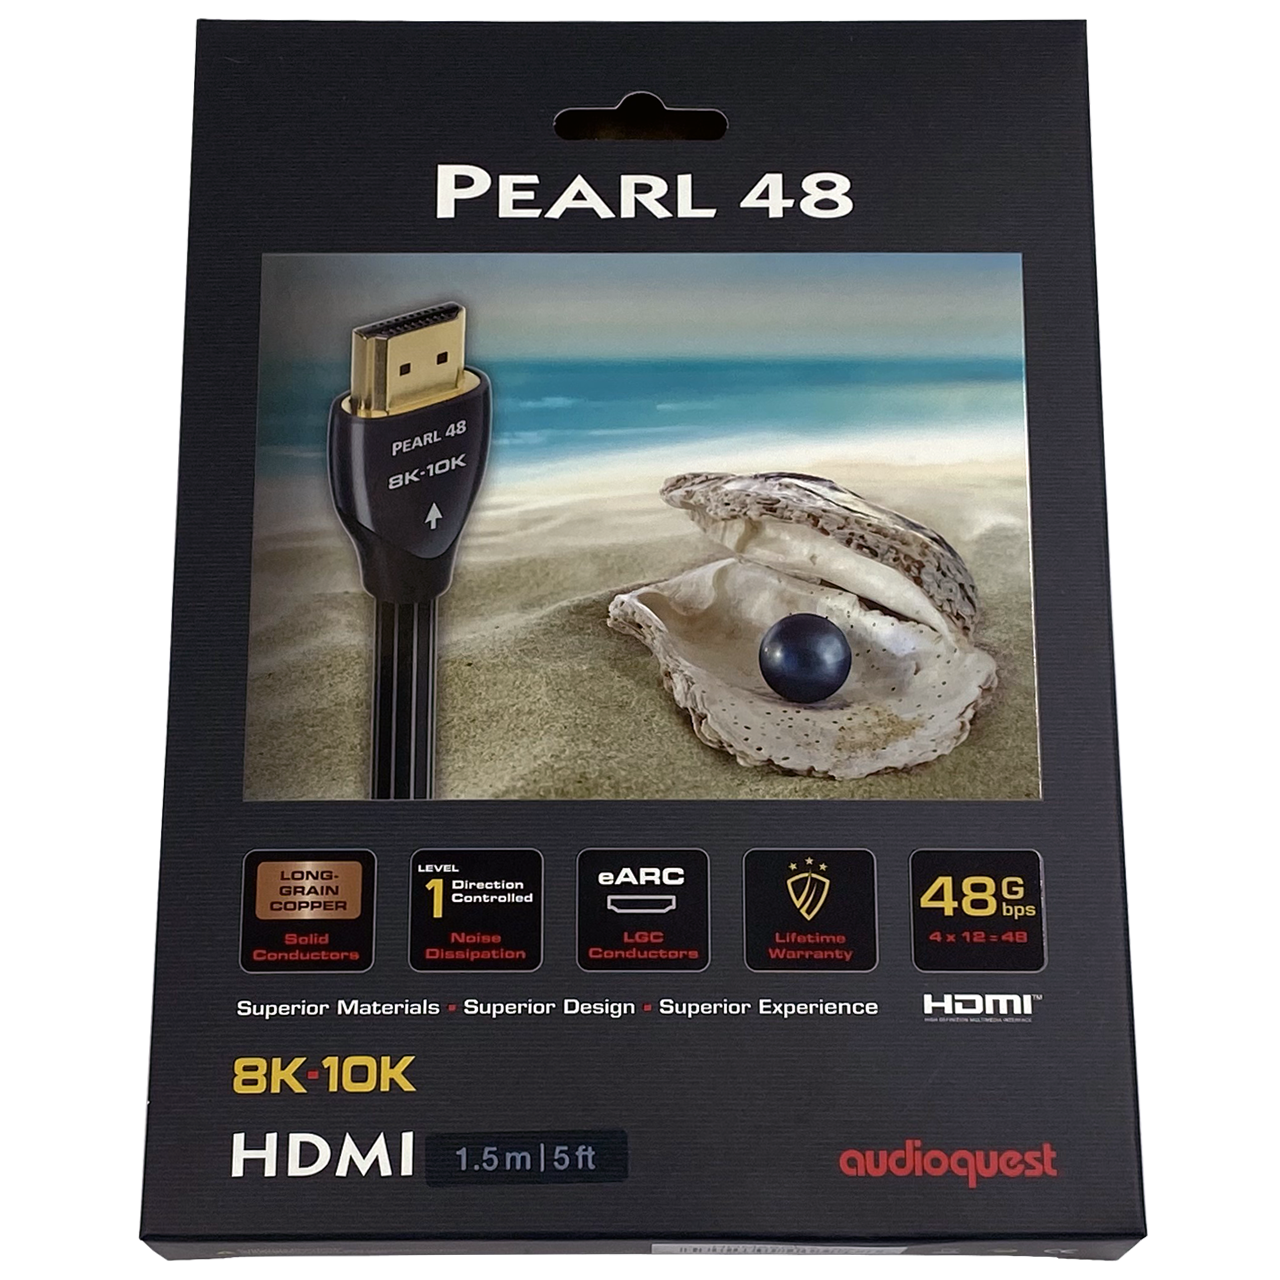 Audioquest Pearl 48 8K-10K 48 GBPS HDMI Cable